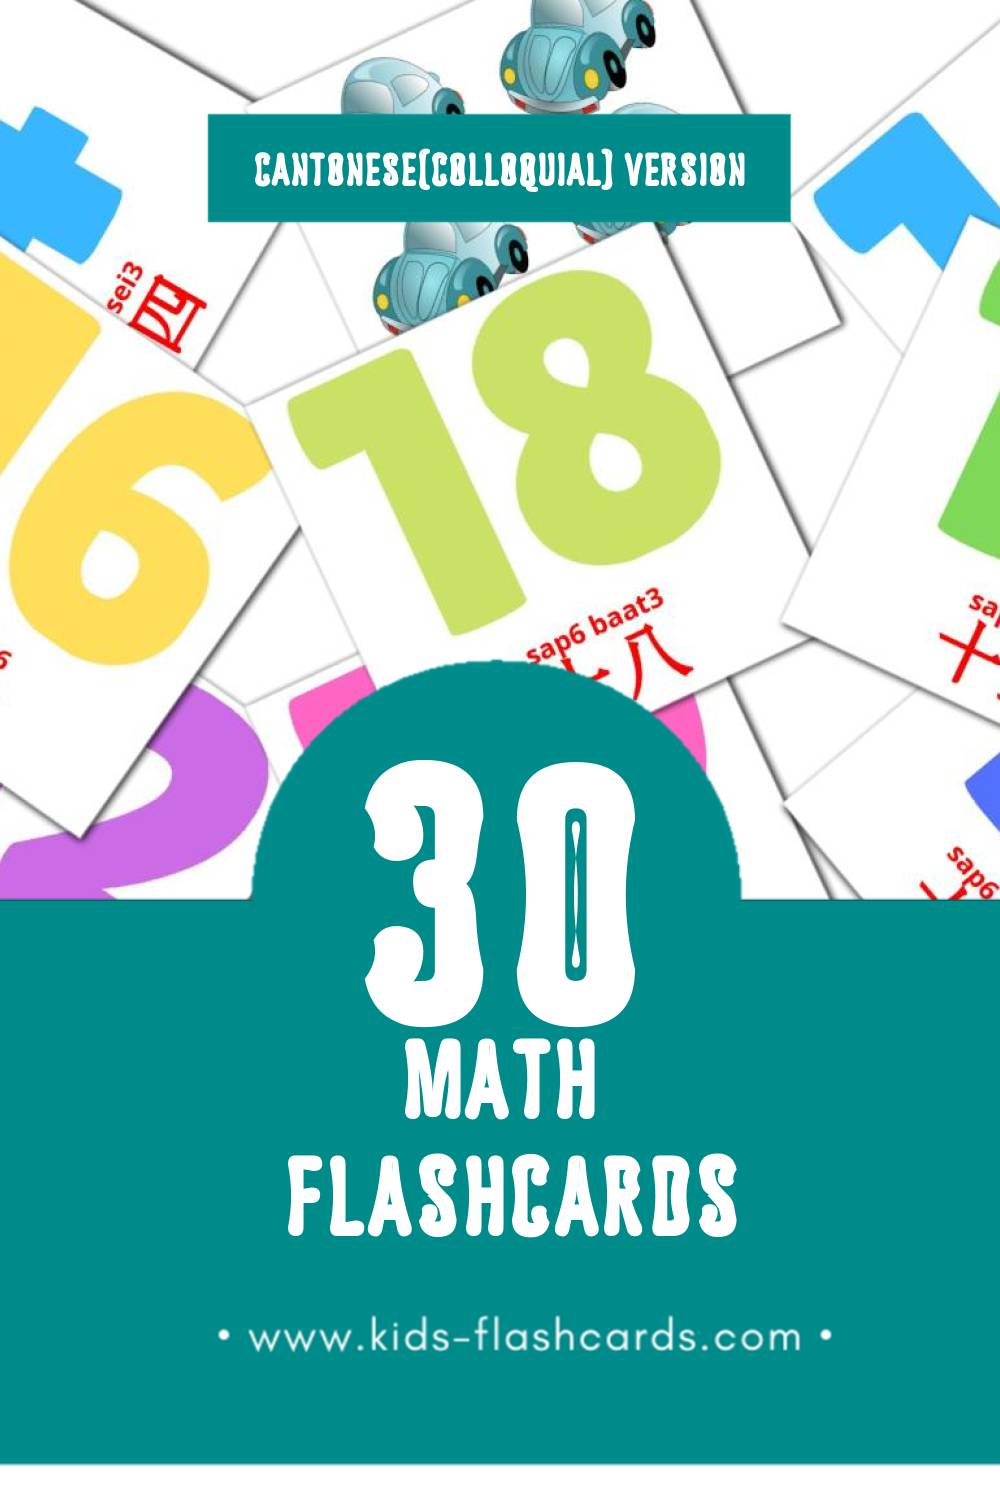 Visual 數字 sou3 zi6 Flashcards for Toddlers (30 cards in Cantonese(Colloquial))